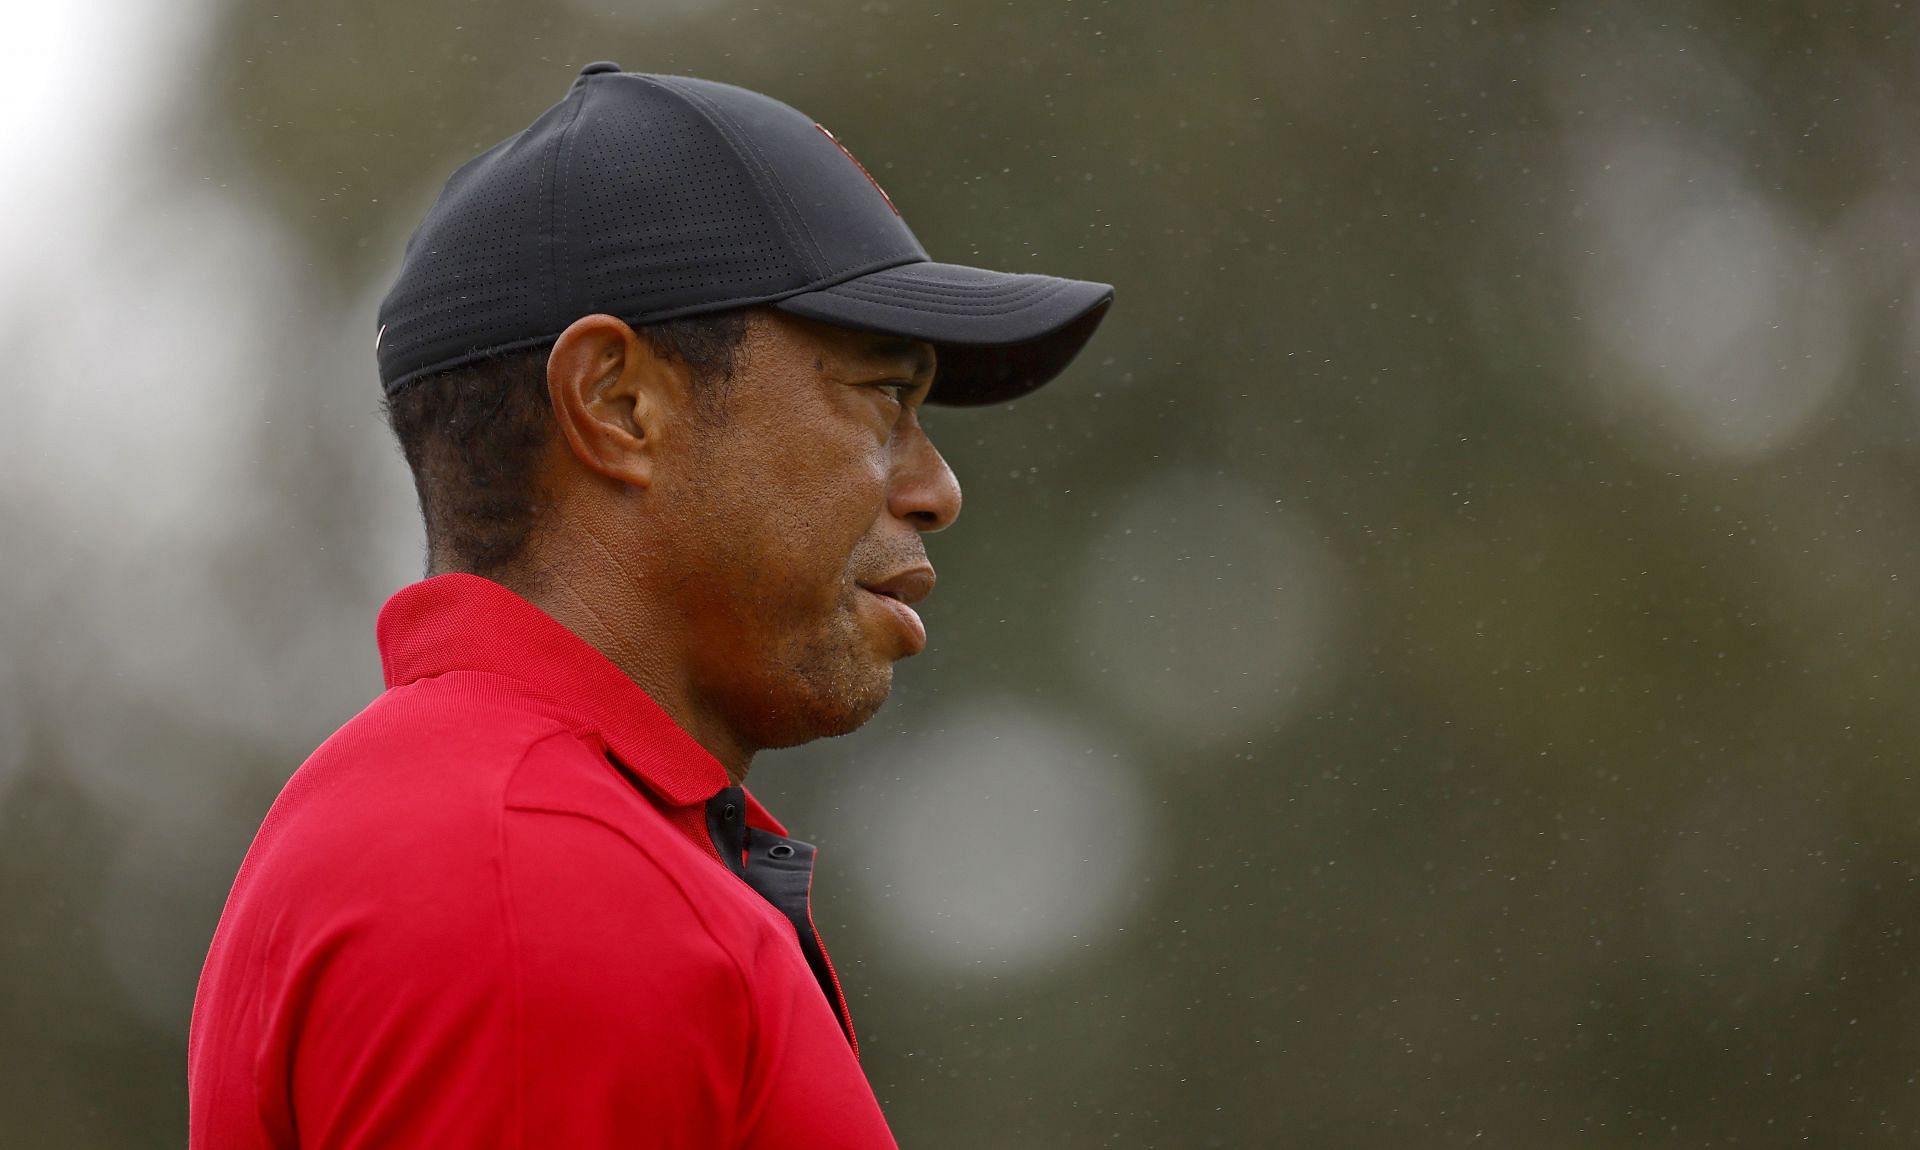 Tiger Woods is not retiring from golf just yet